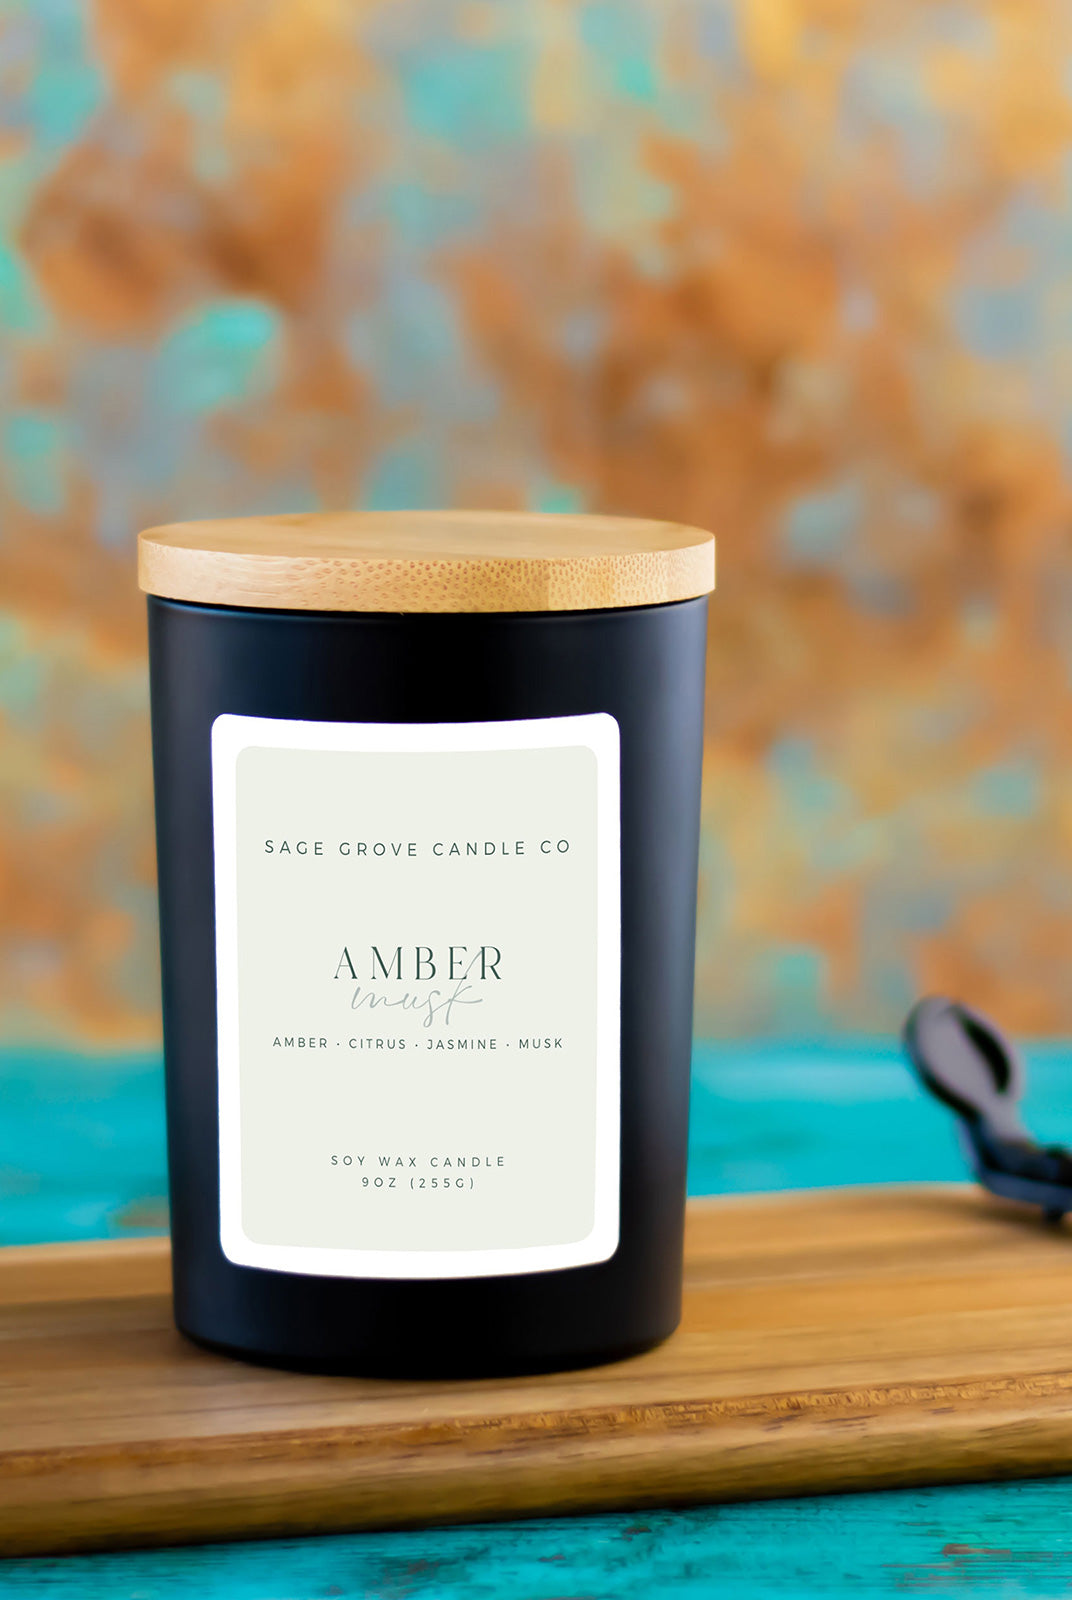 amber musk candle in ceramic jar on wood surface